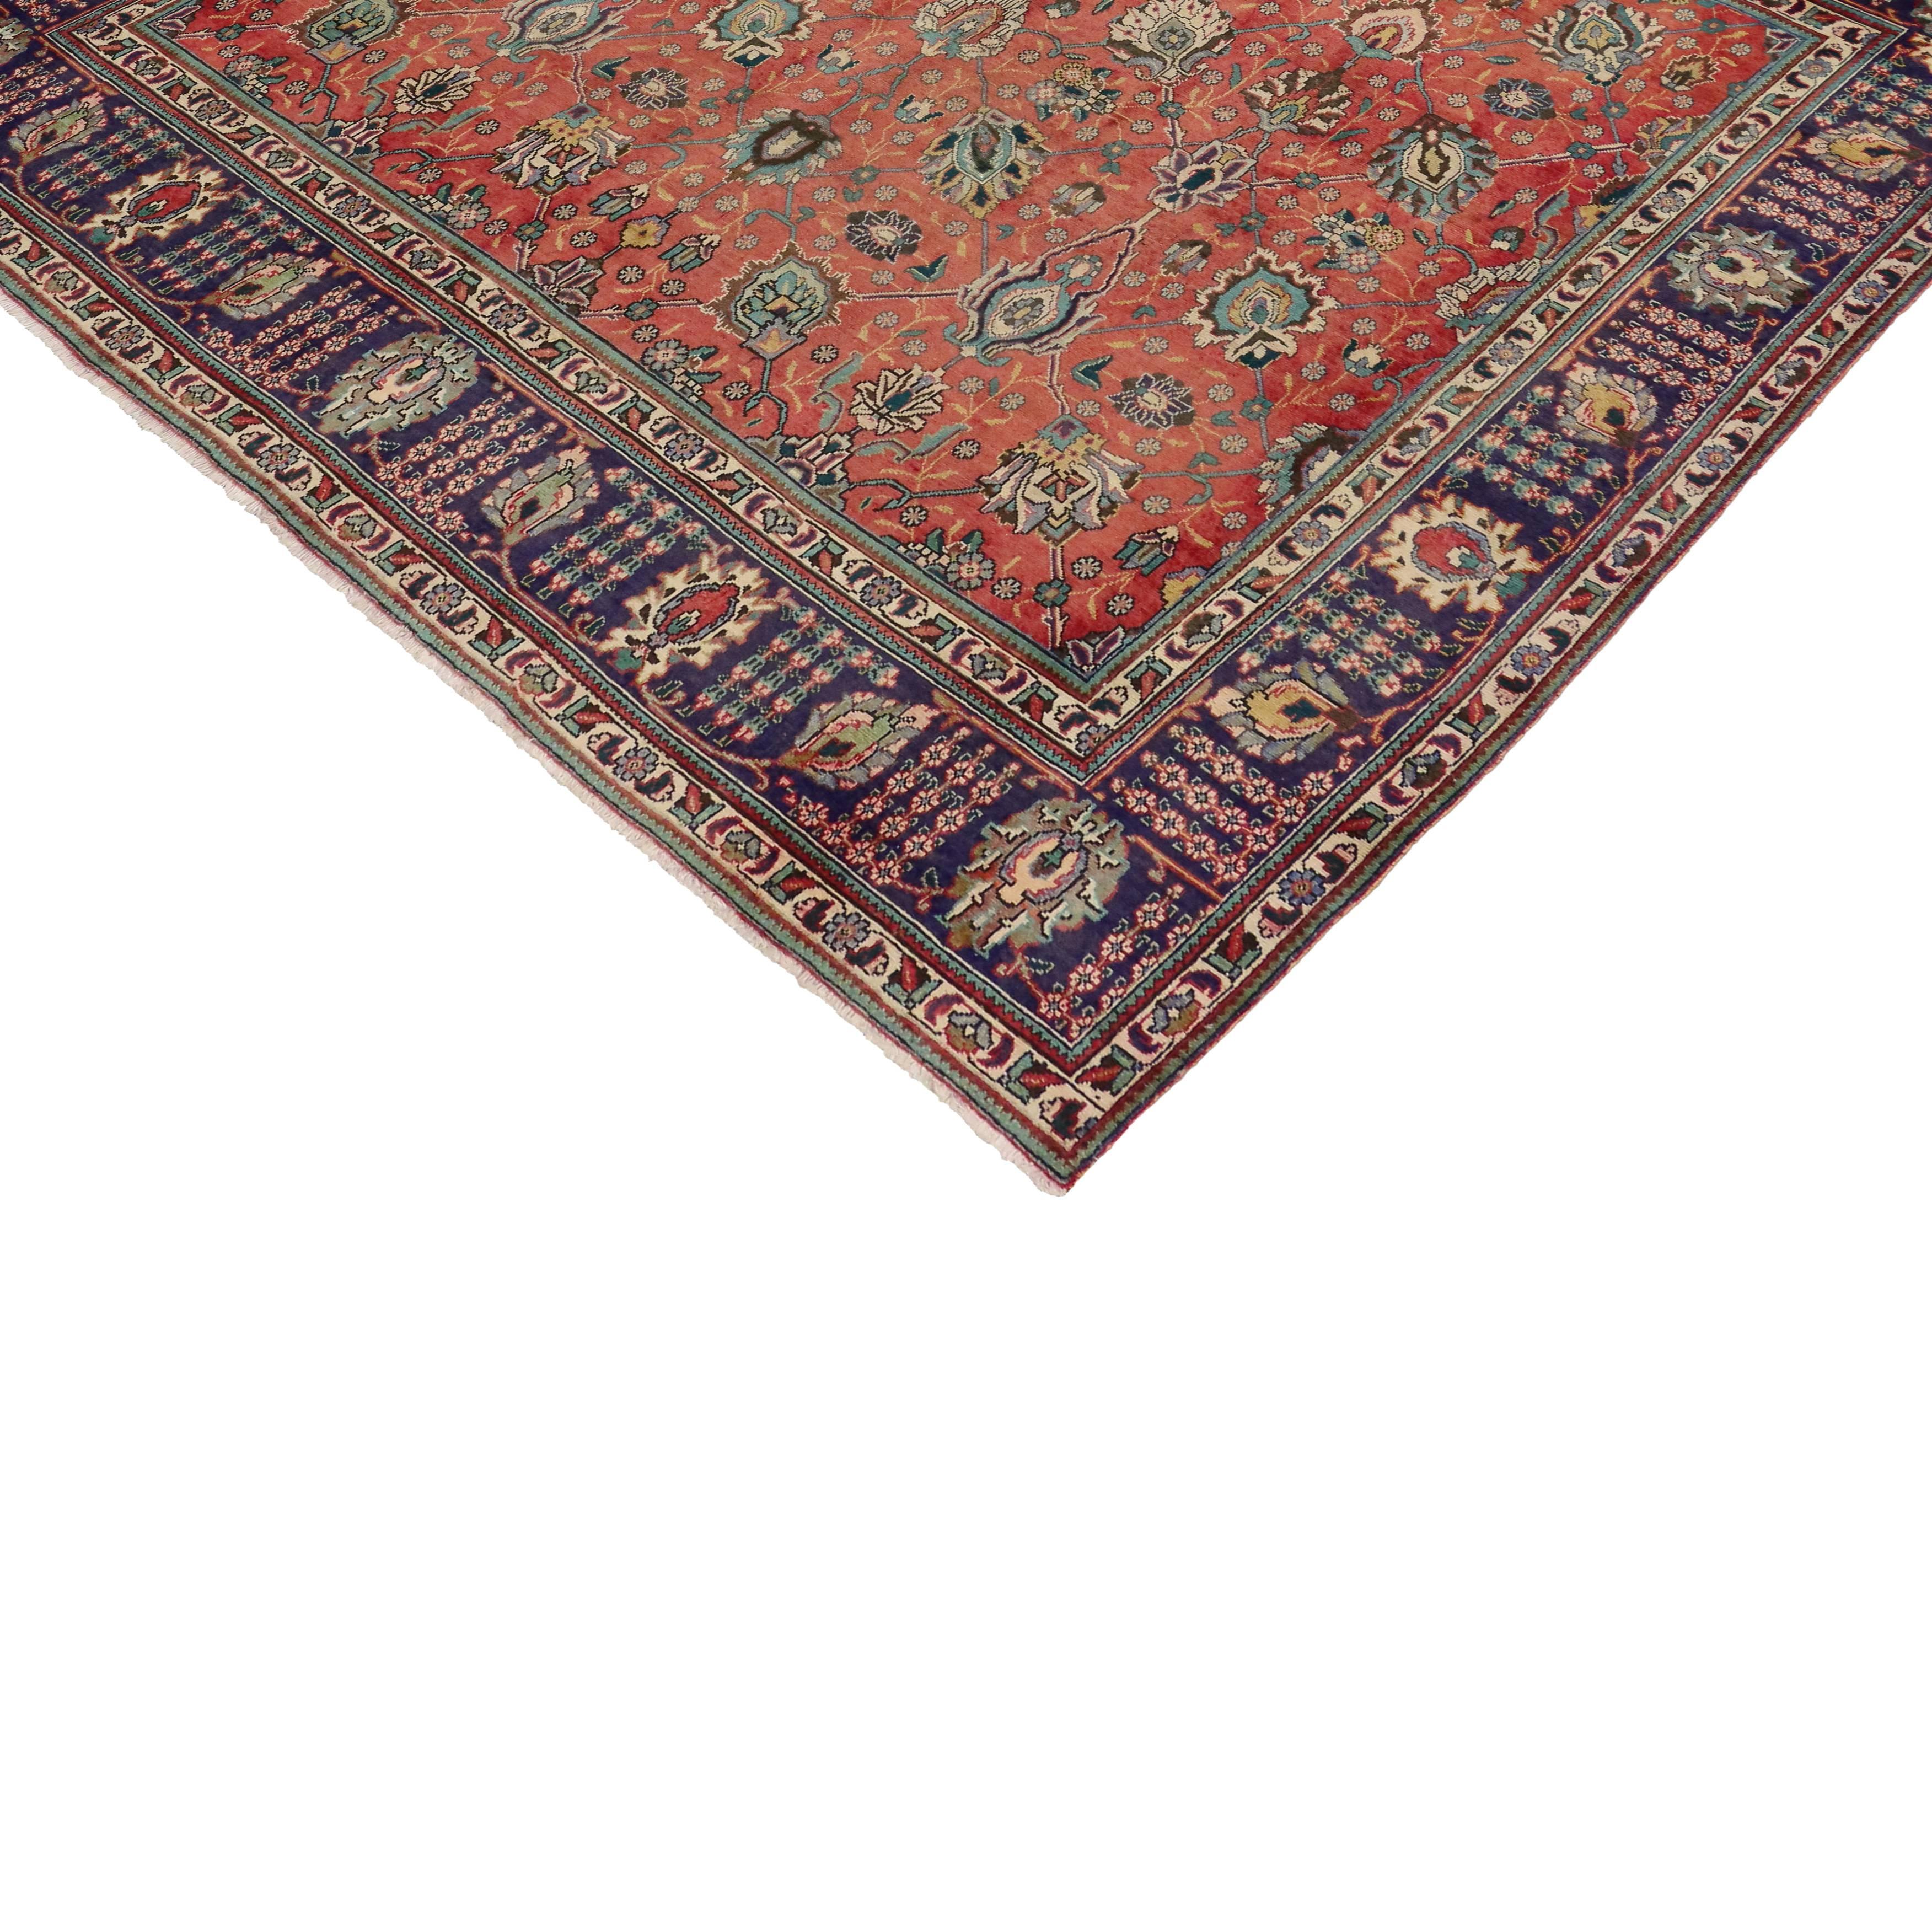 Embodying the highly decorative aesthetic, this vintage Persian Tabriz rug displays a traditional style. Featuring a tastefully casual presence and sophisticated chic style, the all-over geometric pattern resonates an astounding degree of